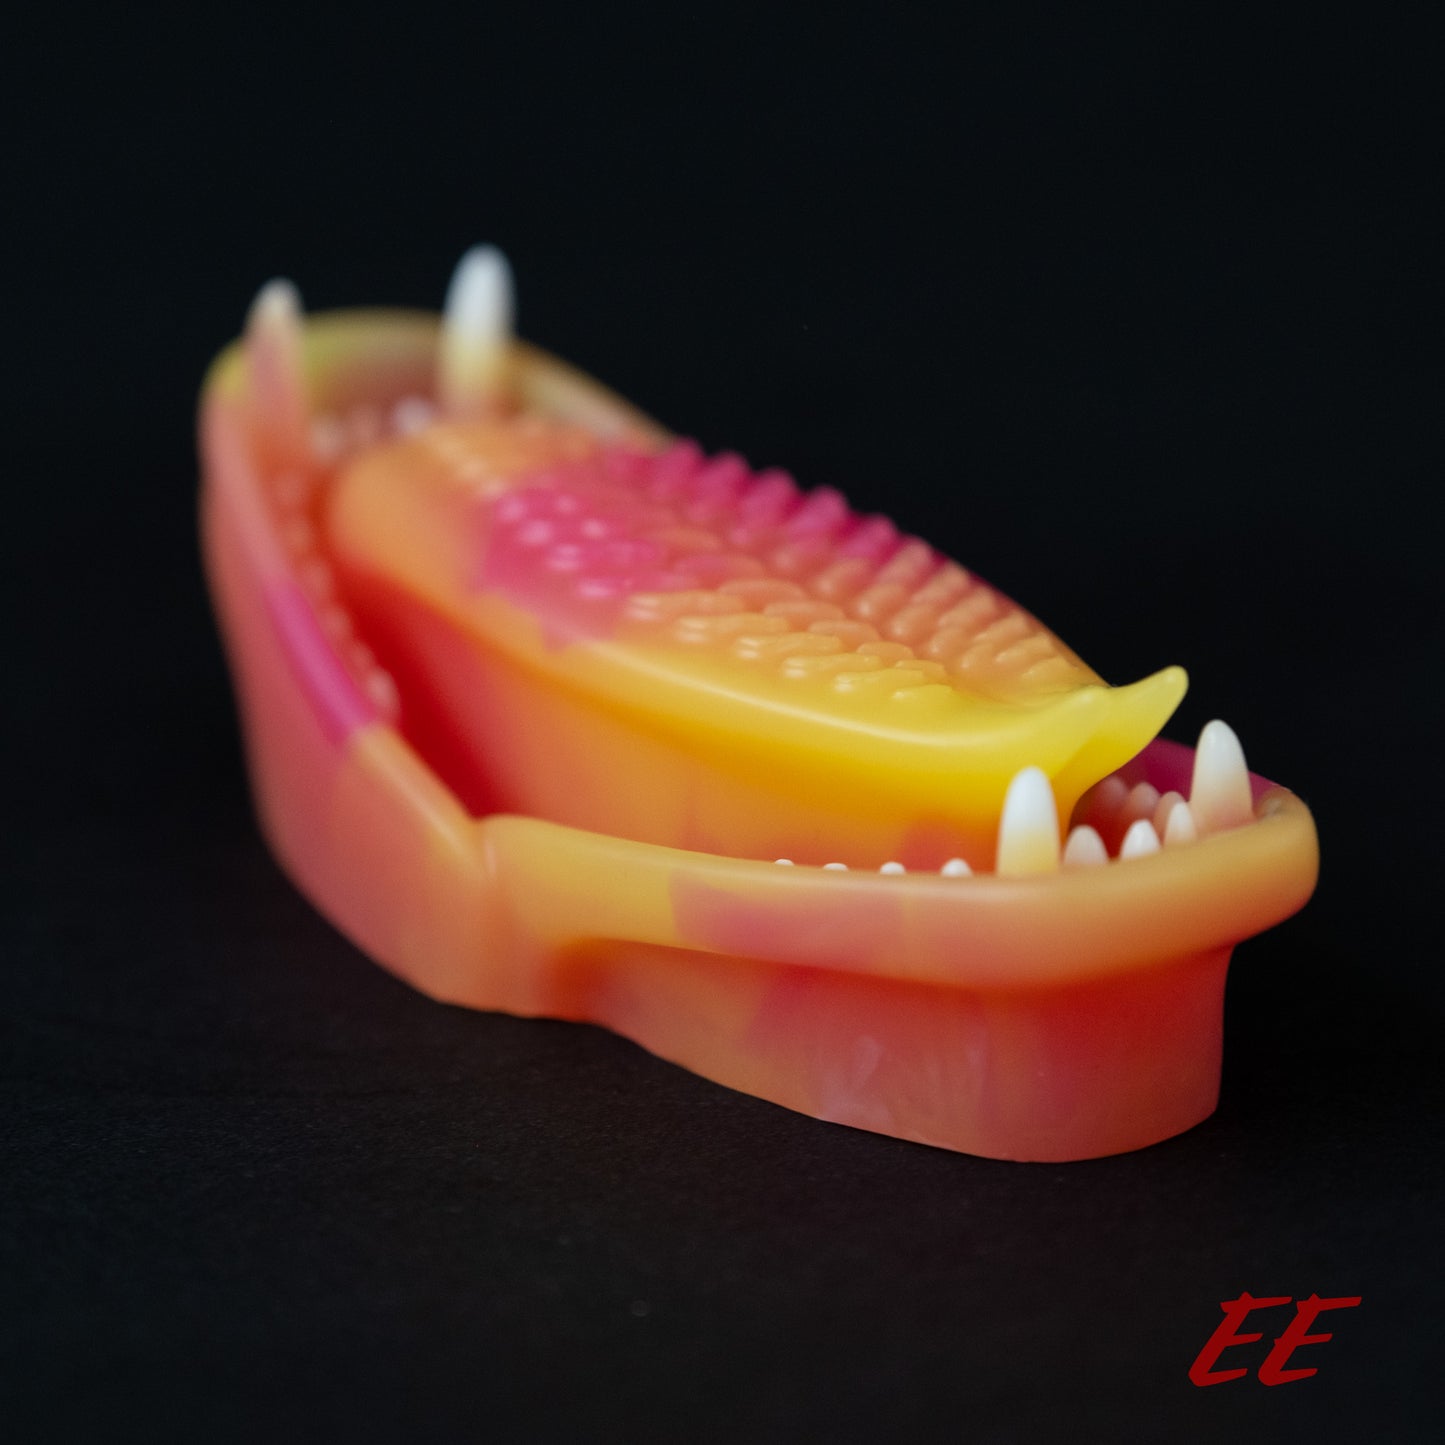 Ecthir Silicone Grindable - Pink/Yellow Fade - Medium Firmness